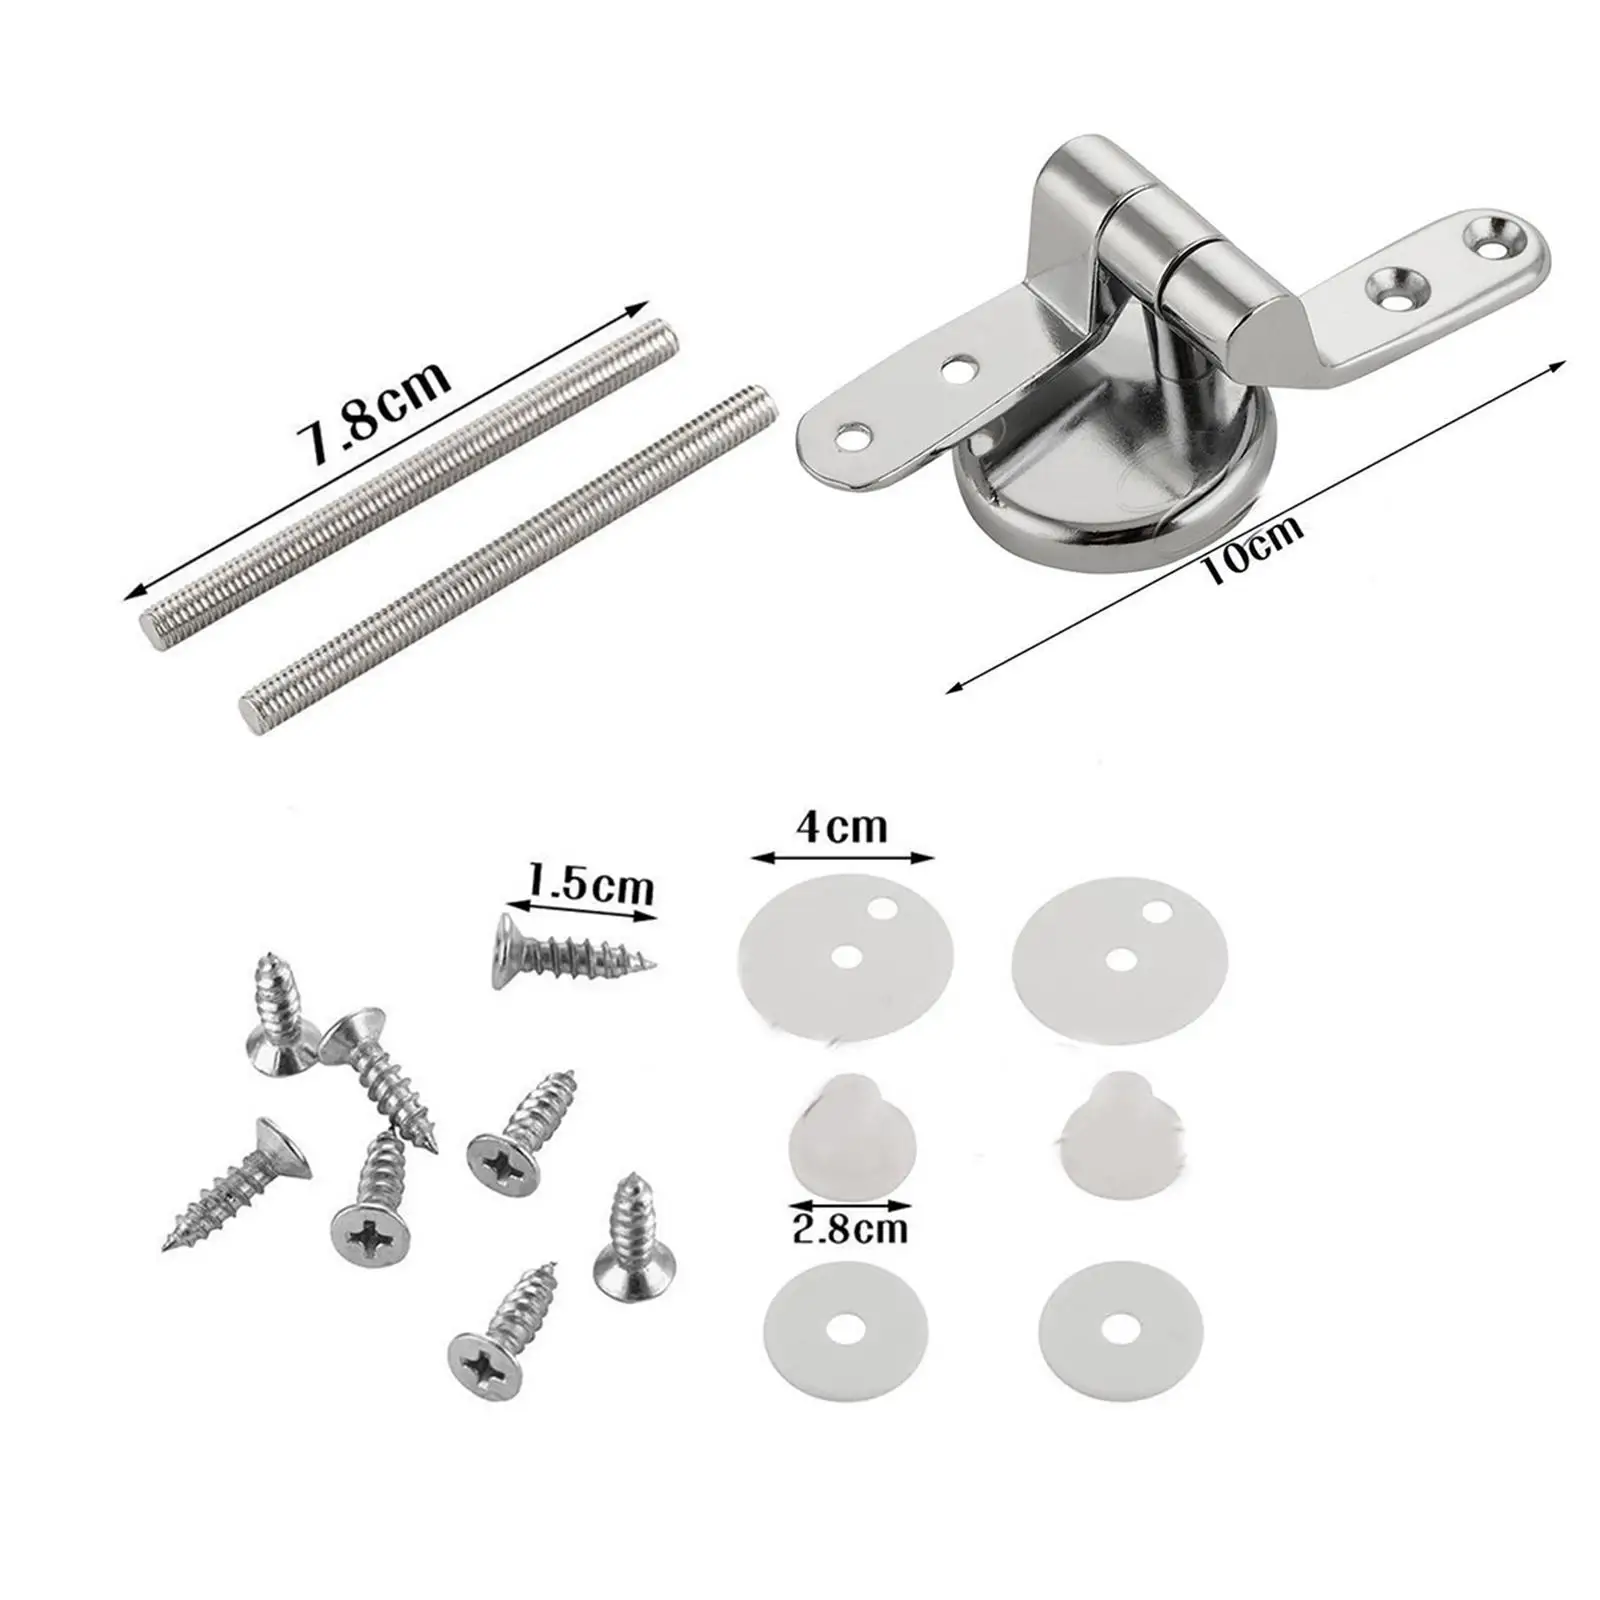 Toilet Lid Hinges Fixtures Set Threaded Rod and Screws General Accessory Replace Parts for Bathrooms Simple Installation Sturdy